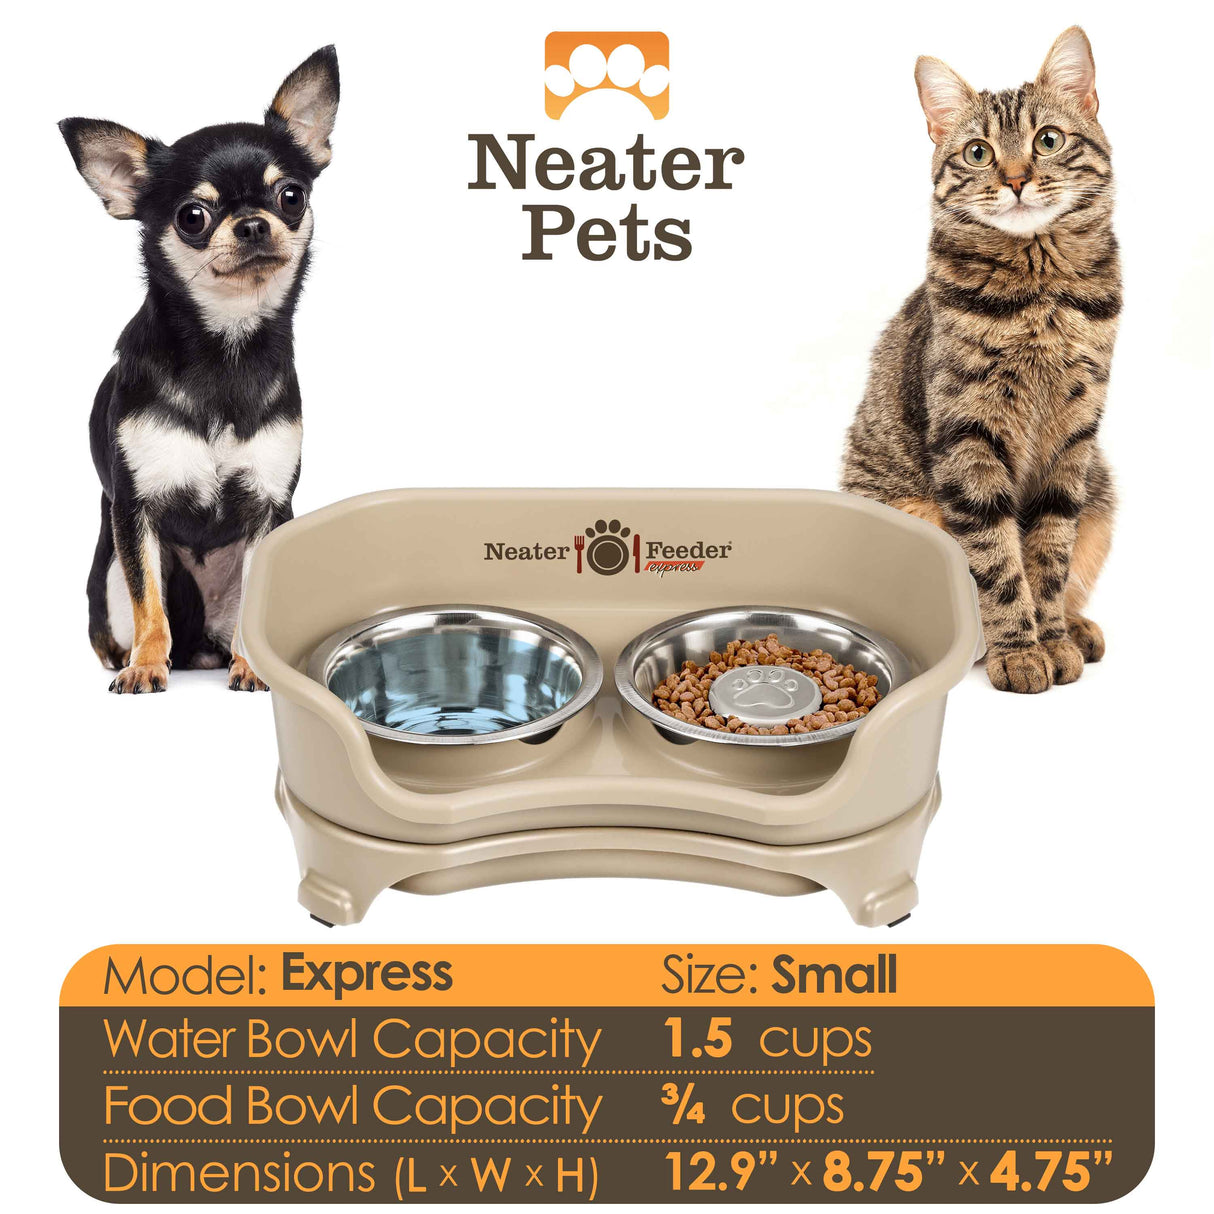 Information about the Almond cat to small dog EXPRESS Neater Feeder with Stainless Steel Slow Feed Bowl